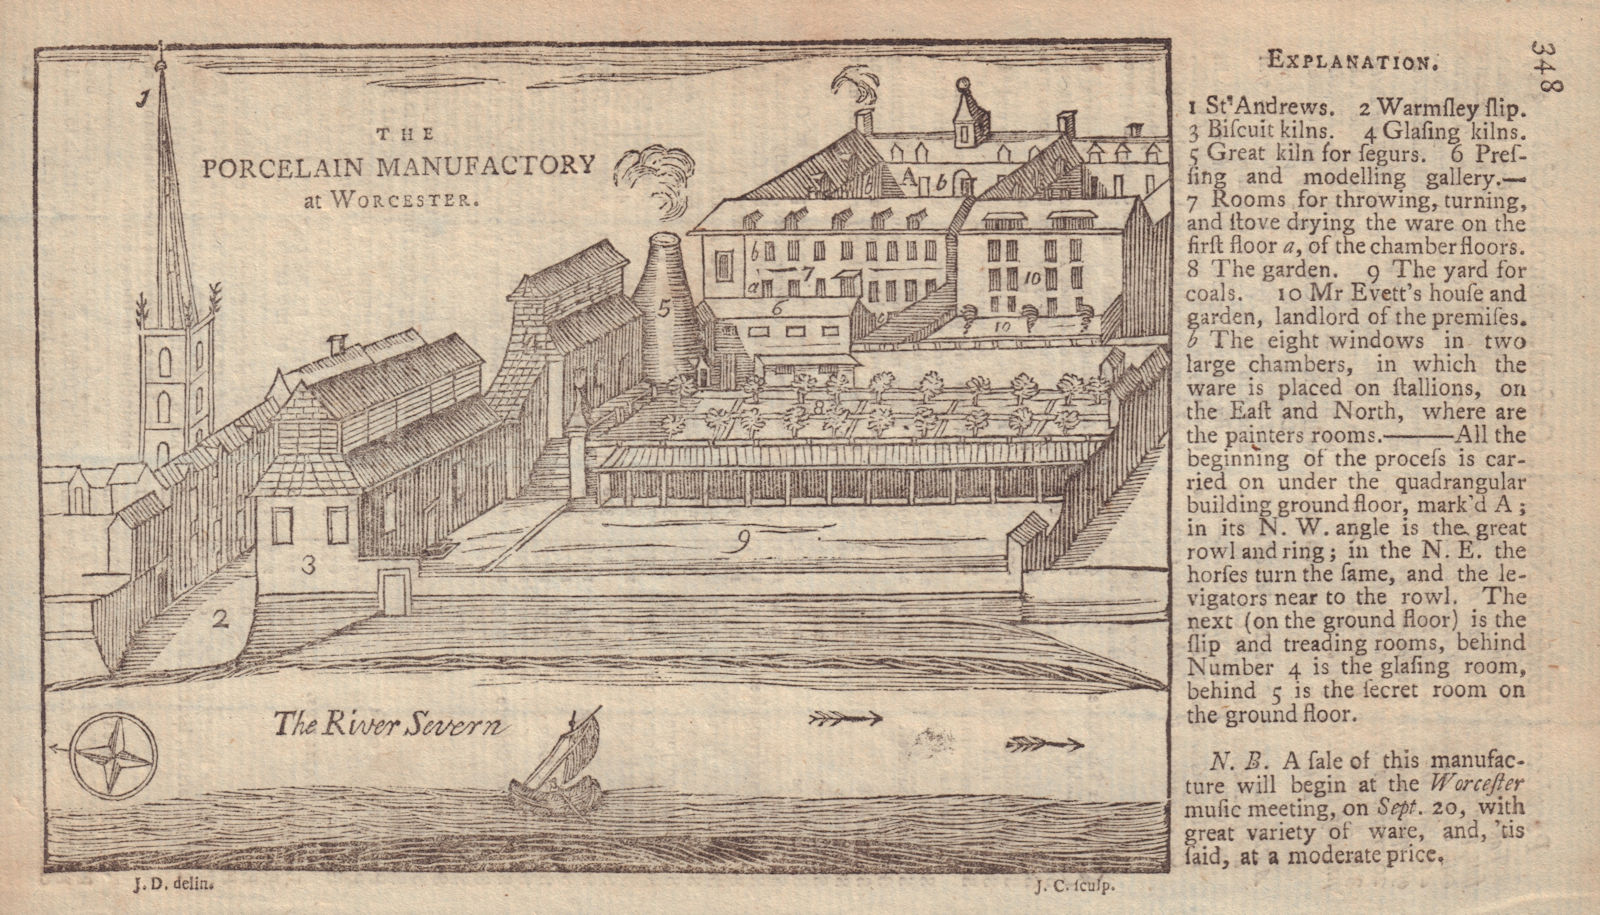 The Porcelain Manufactory at Worcester. St. Andrews church. GENTS MAG 1752